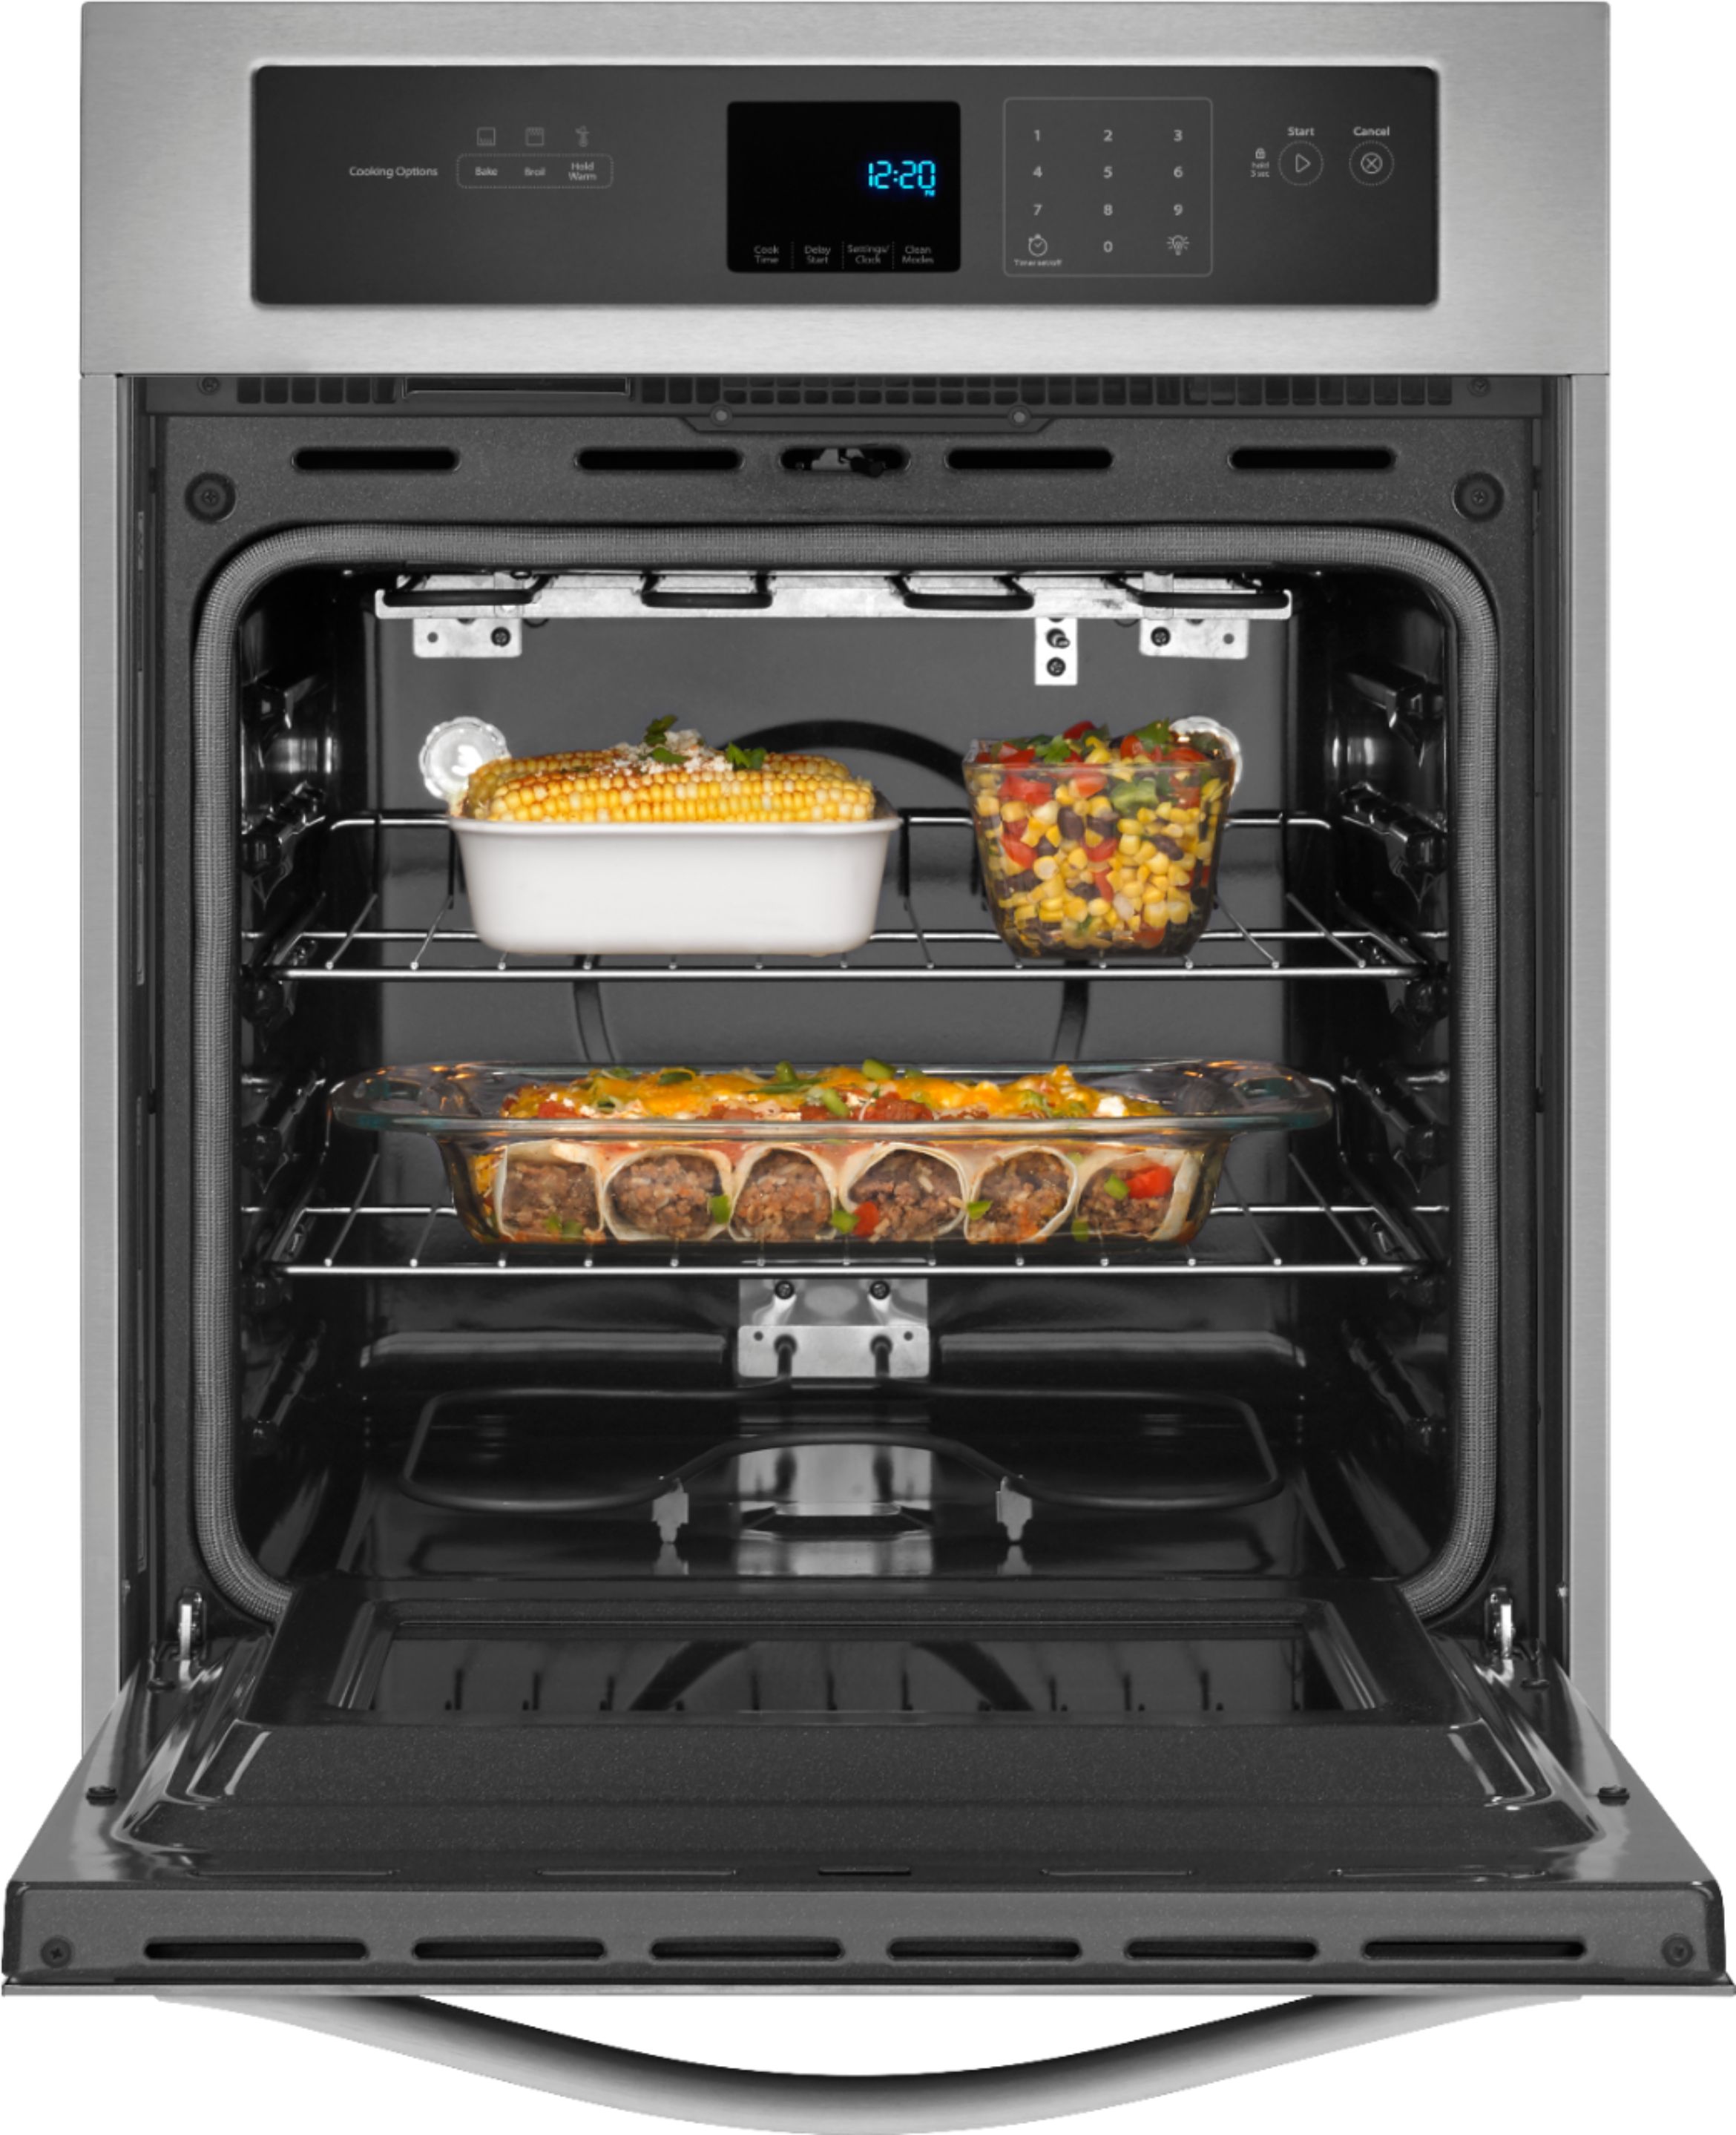 Customer Reviews Whirlpool 24 Built In Single Electric Wall Oven